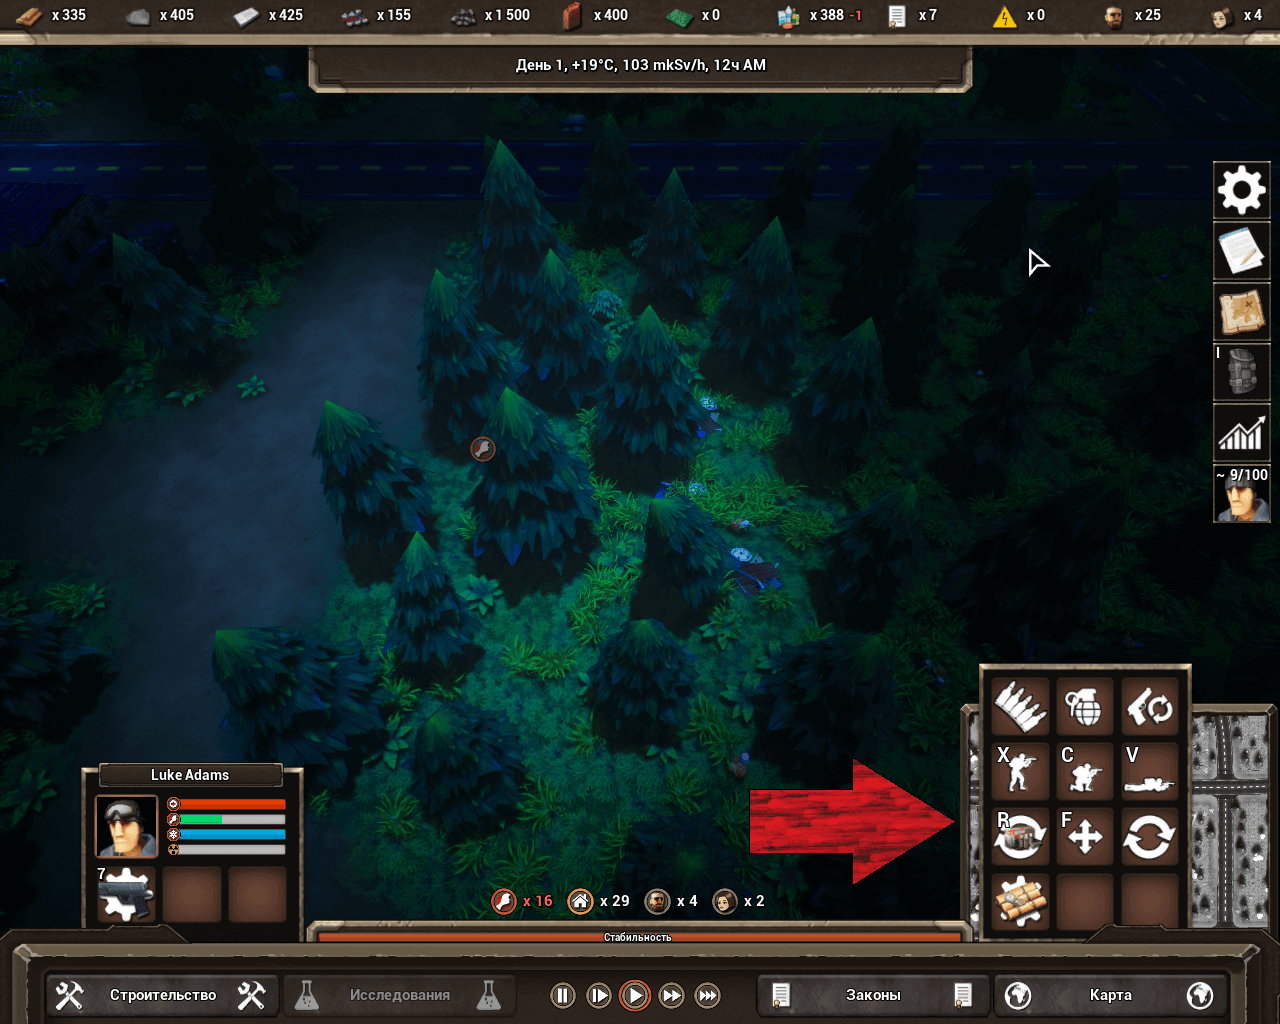 Well, how can you explore the map when the control interface panel covers almost the entire map, and if you minimize the panel, you lose control over the man...?